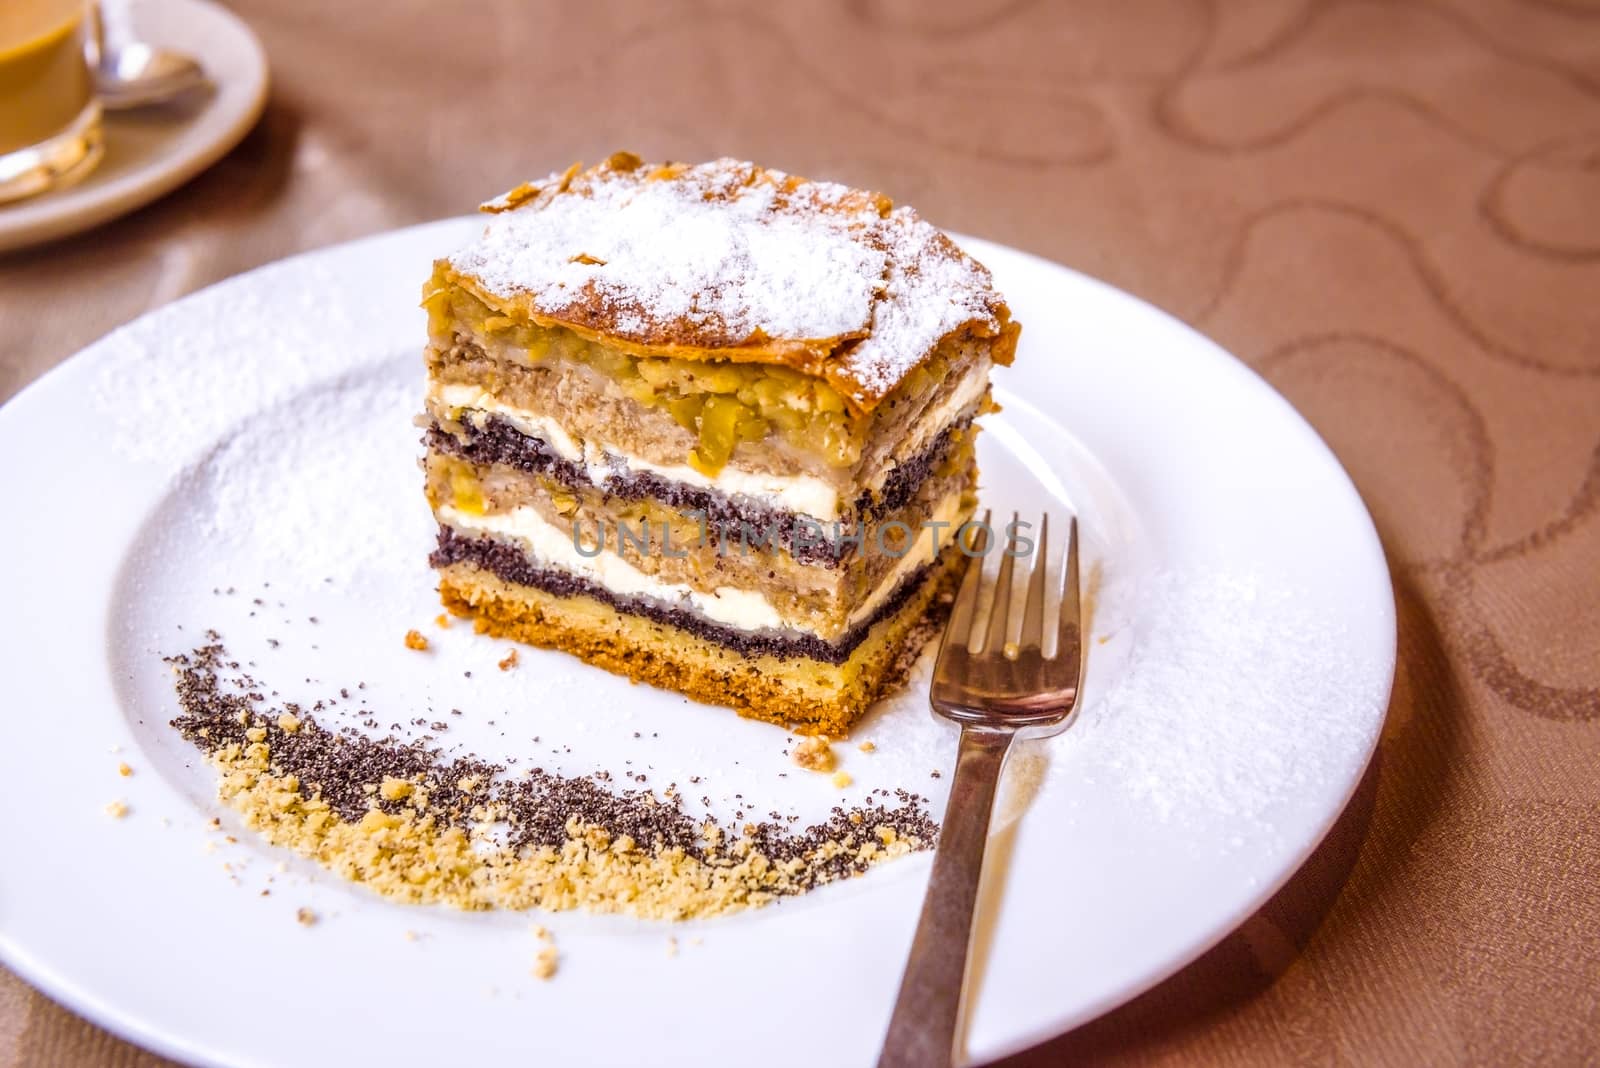 Traditional Slovenian cake with layers by YesPhotographers